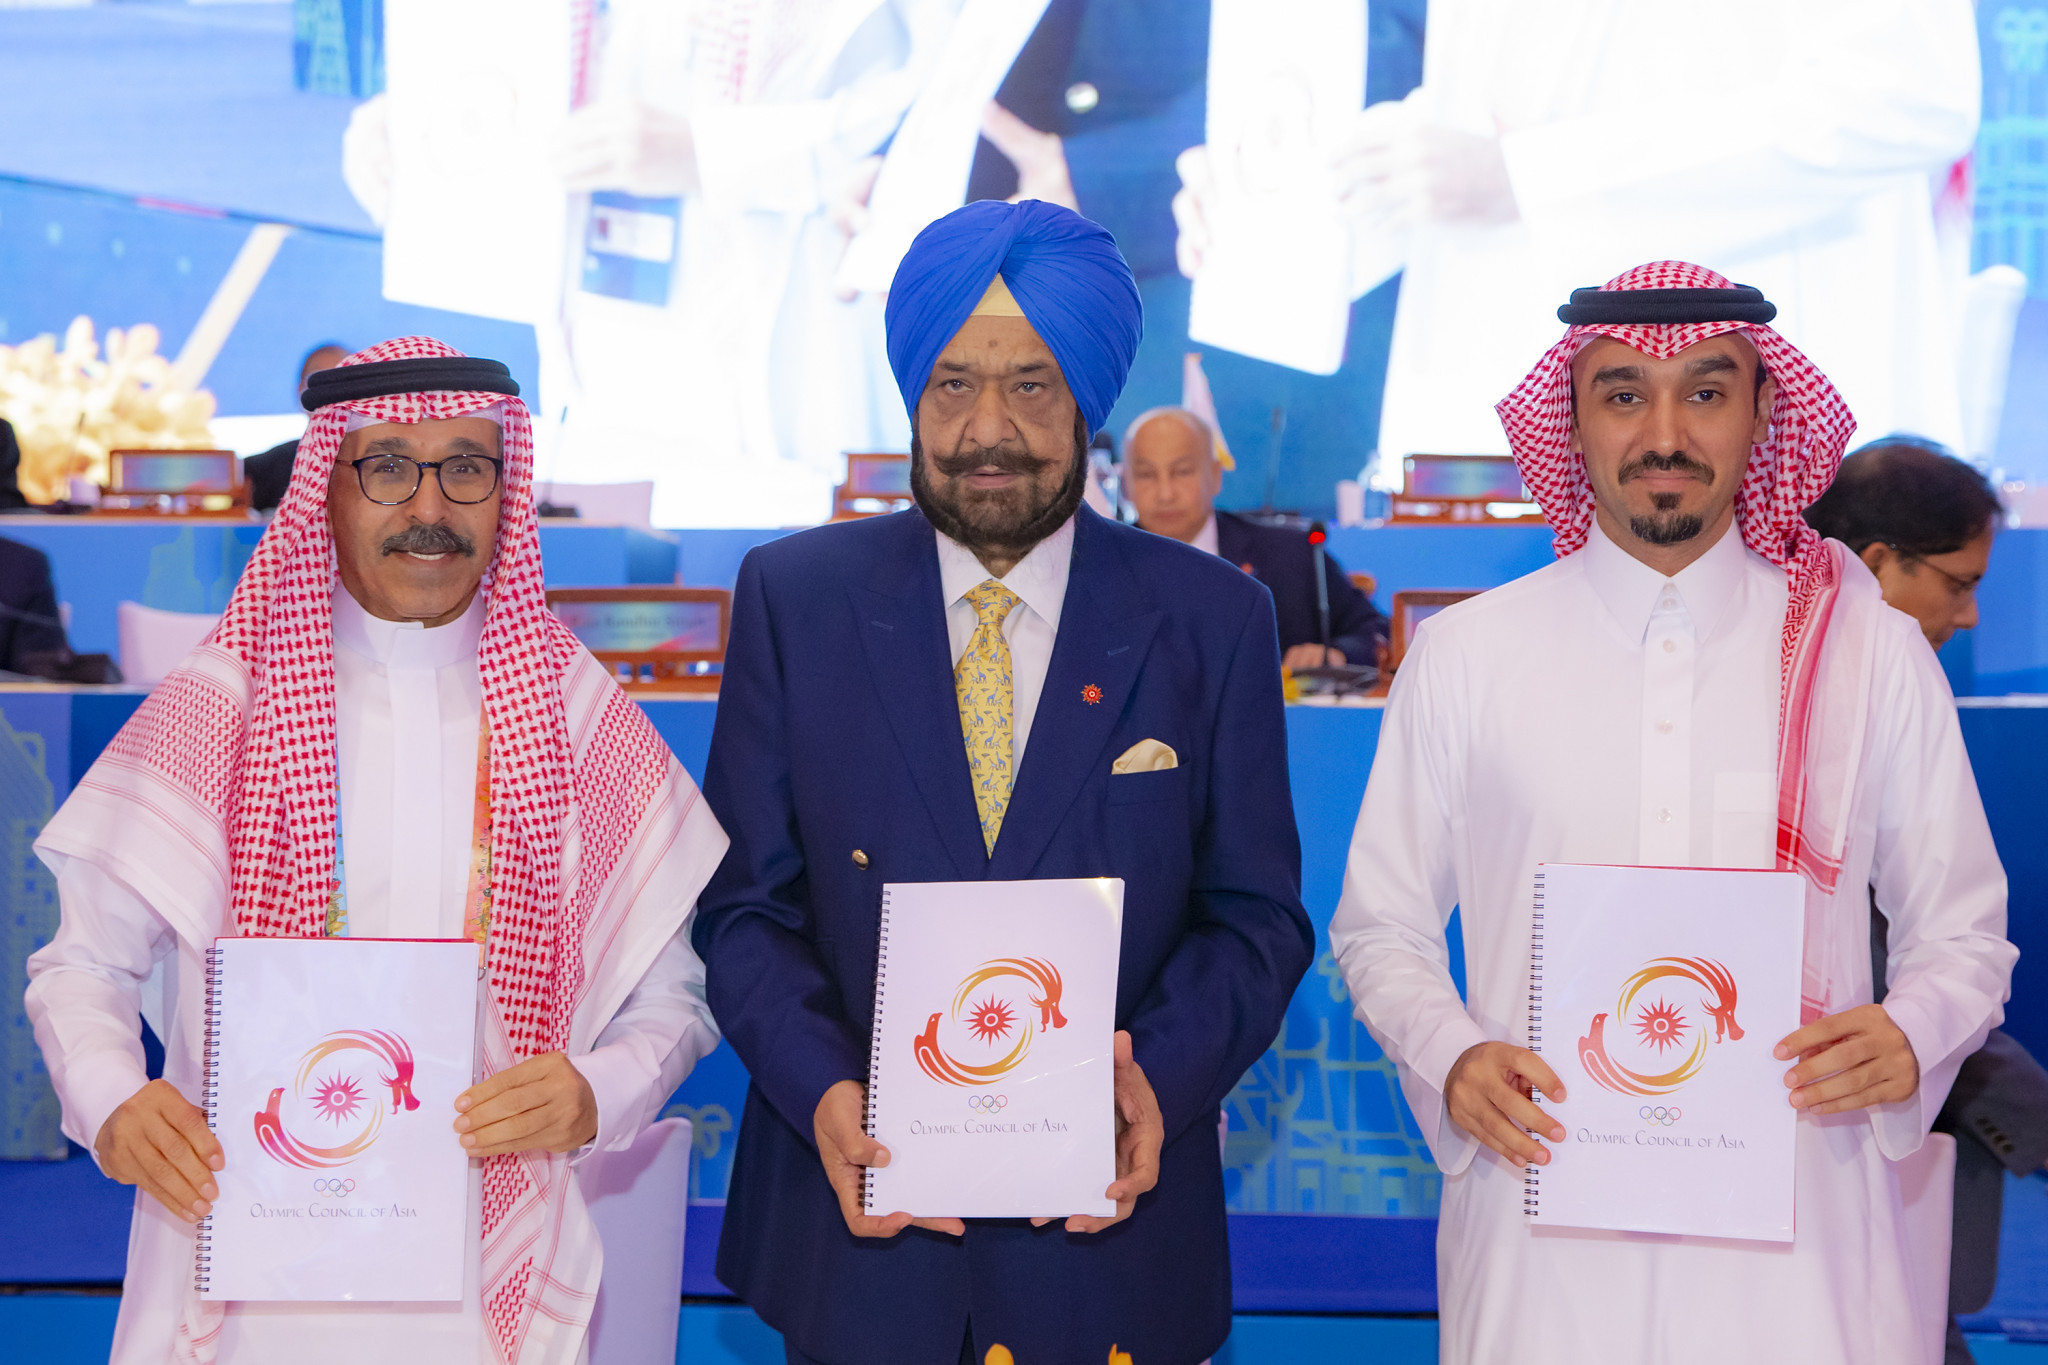 Saudi Olympic and Paralympic Committee President Prince Abdulaziz Bin Turki Al Faisal, right, chaired a group which secured hosting rights for the 2029 Asian Winter Games in Trojena ©SAOC